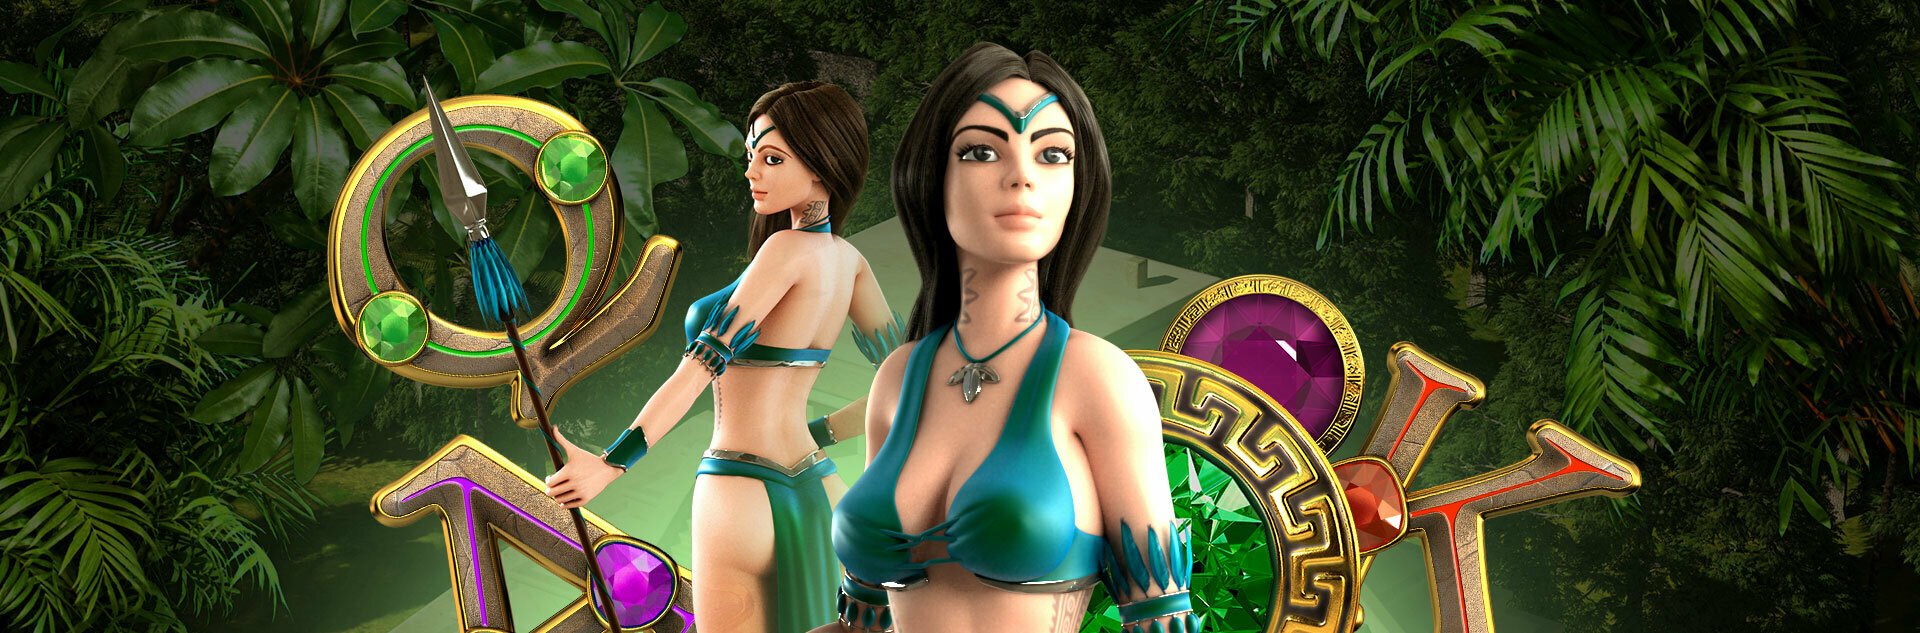 Temple Quest Spinfinity Free Spins